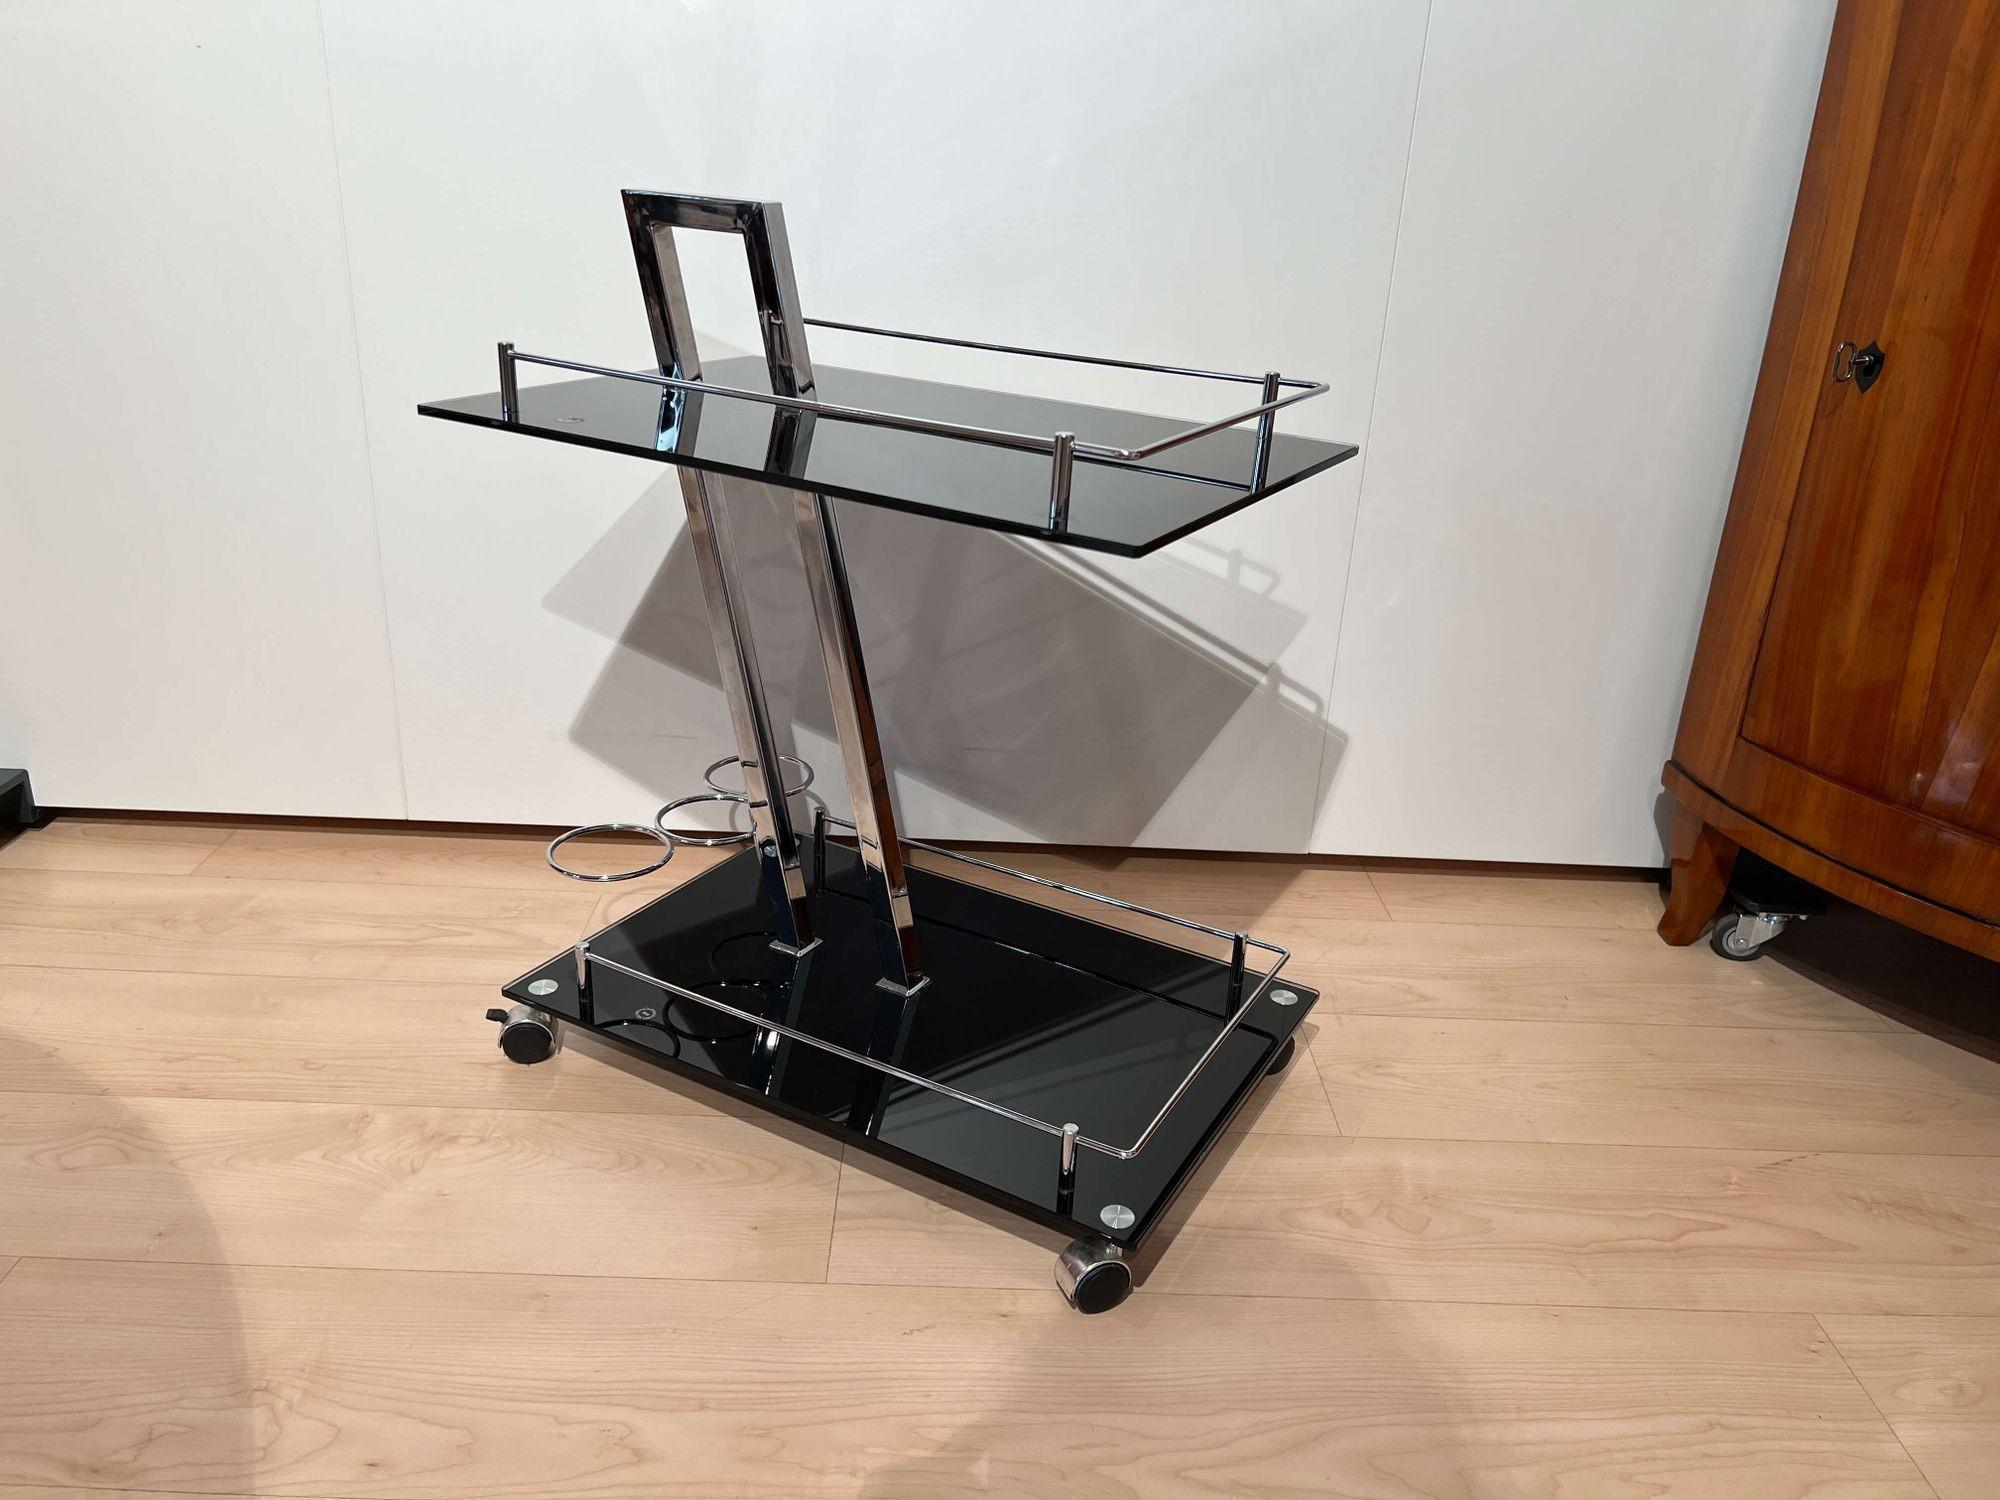 Vintage italian Serving Trolley or Bar Cart, black glass and chrome from the 1970s.
 
Black safety glass shelves. 
Chrome plated high quality metal frame. 
 
Dimensions: 
H 72 cm x W 60 cm x D 40 cm
H 28.34